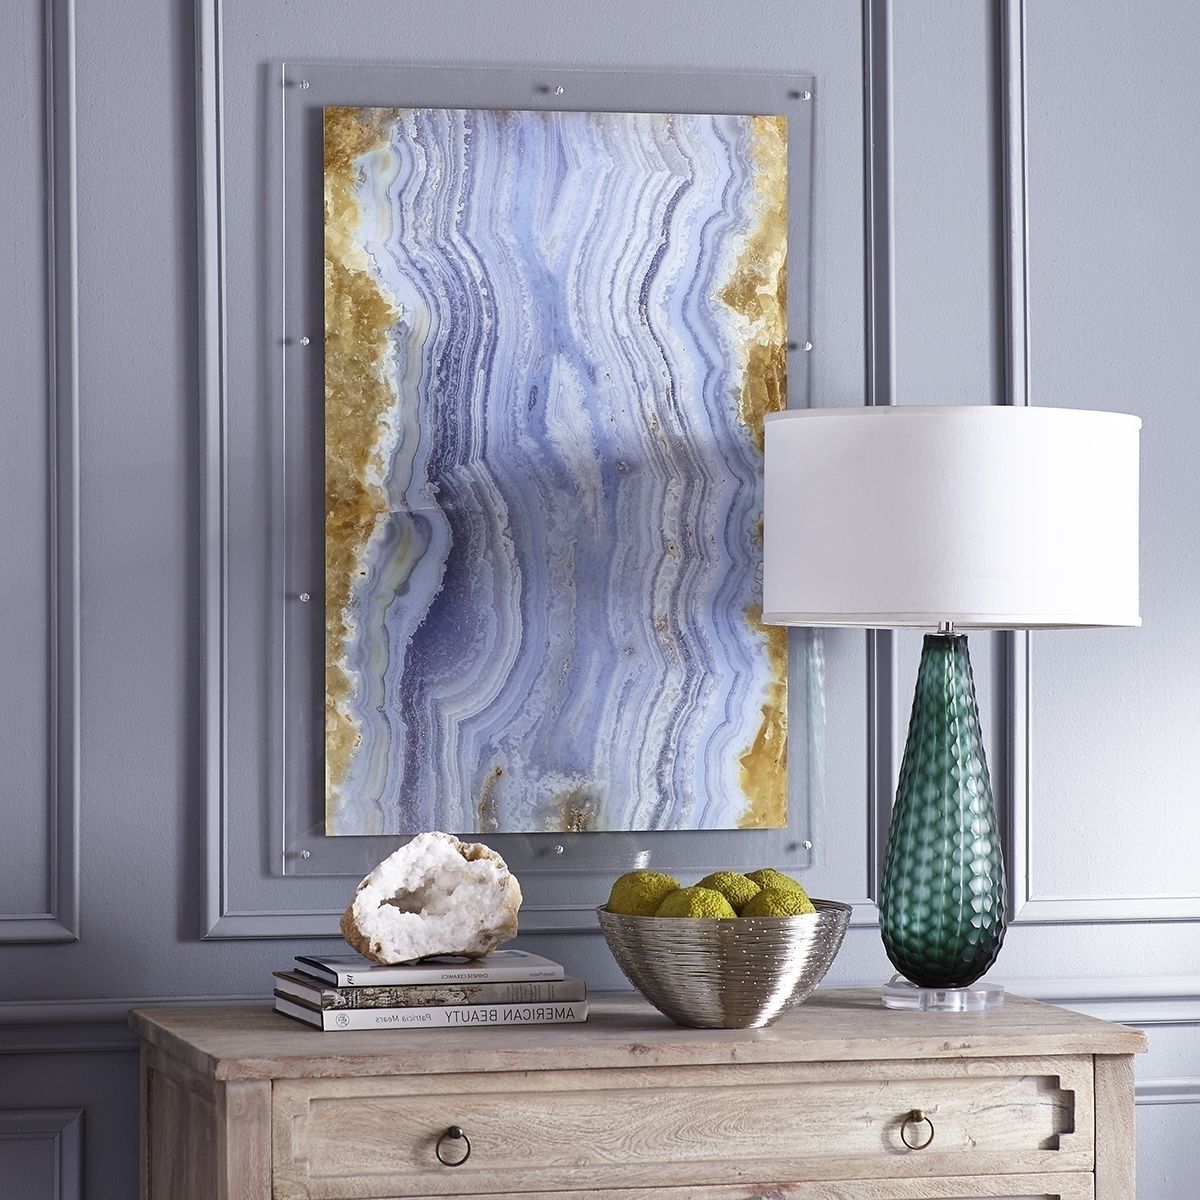 Showing Gallery Of Agate Wall Art View 7 Of 20 Photos | Wall Your With Regard To Agate Wall Art (Photo 10 of 20)